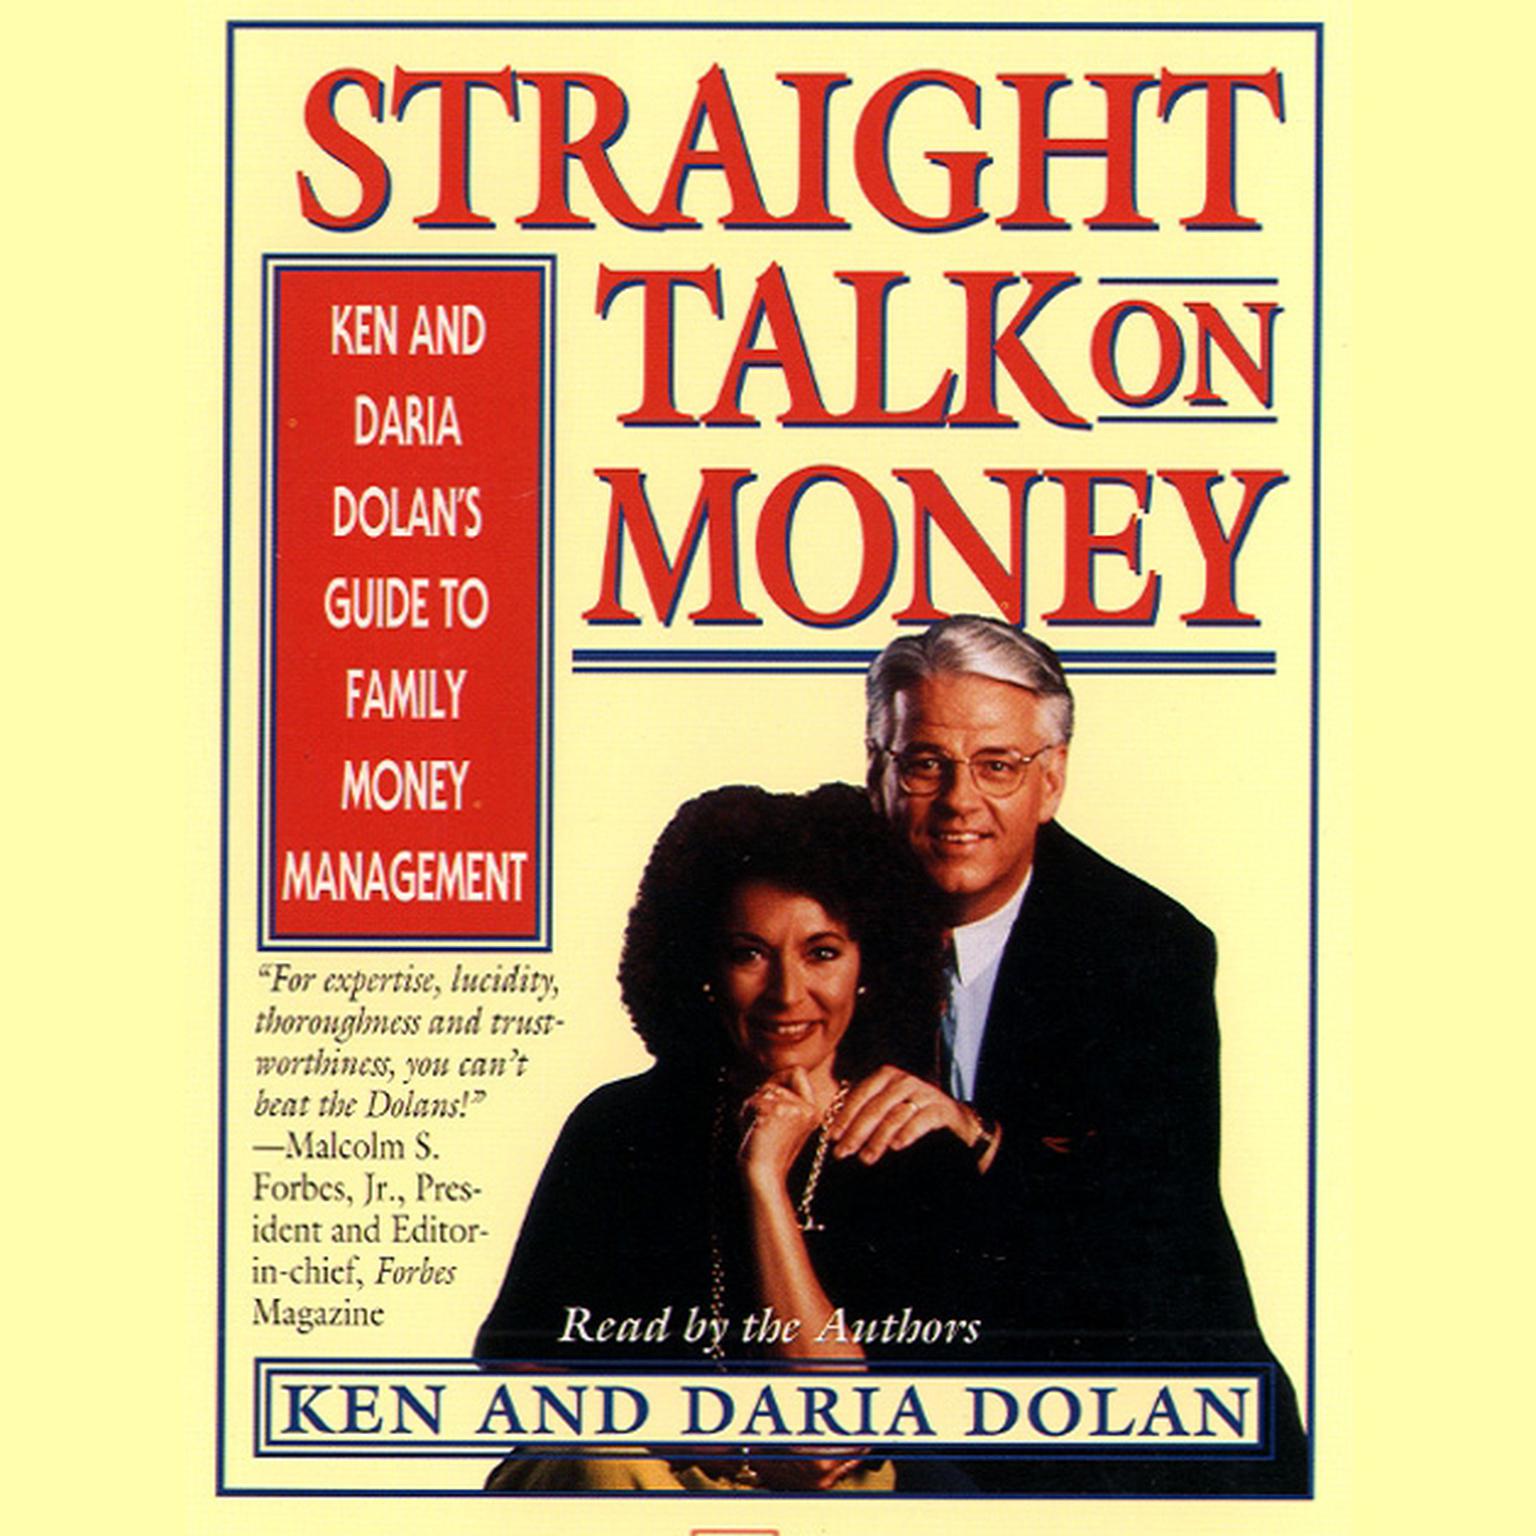 Straight Talk on Money (Abridged): Ken and Darla Dolans Guide to Family Money Management Audiobook, by Ken Dolan